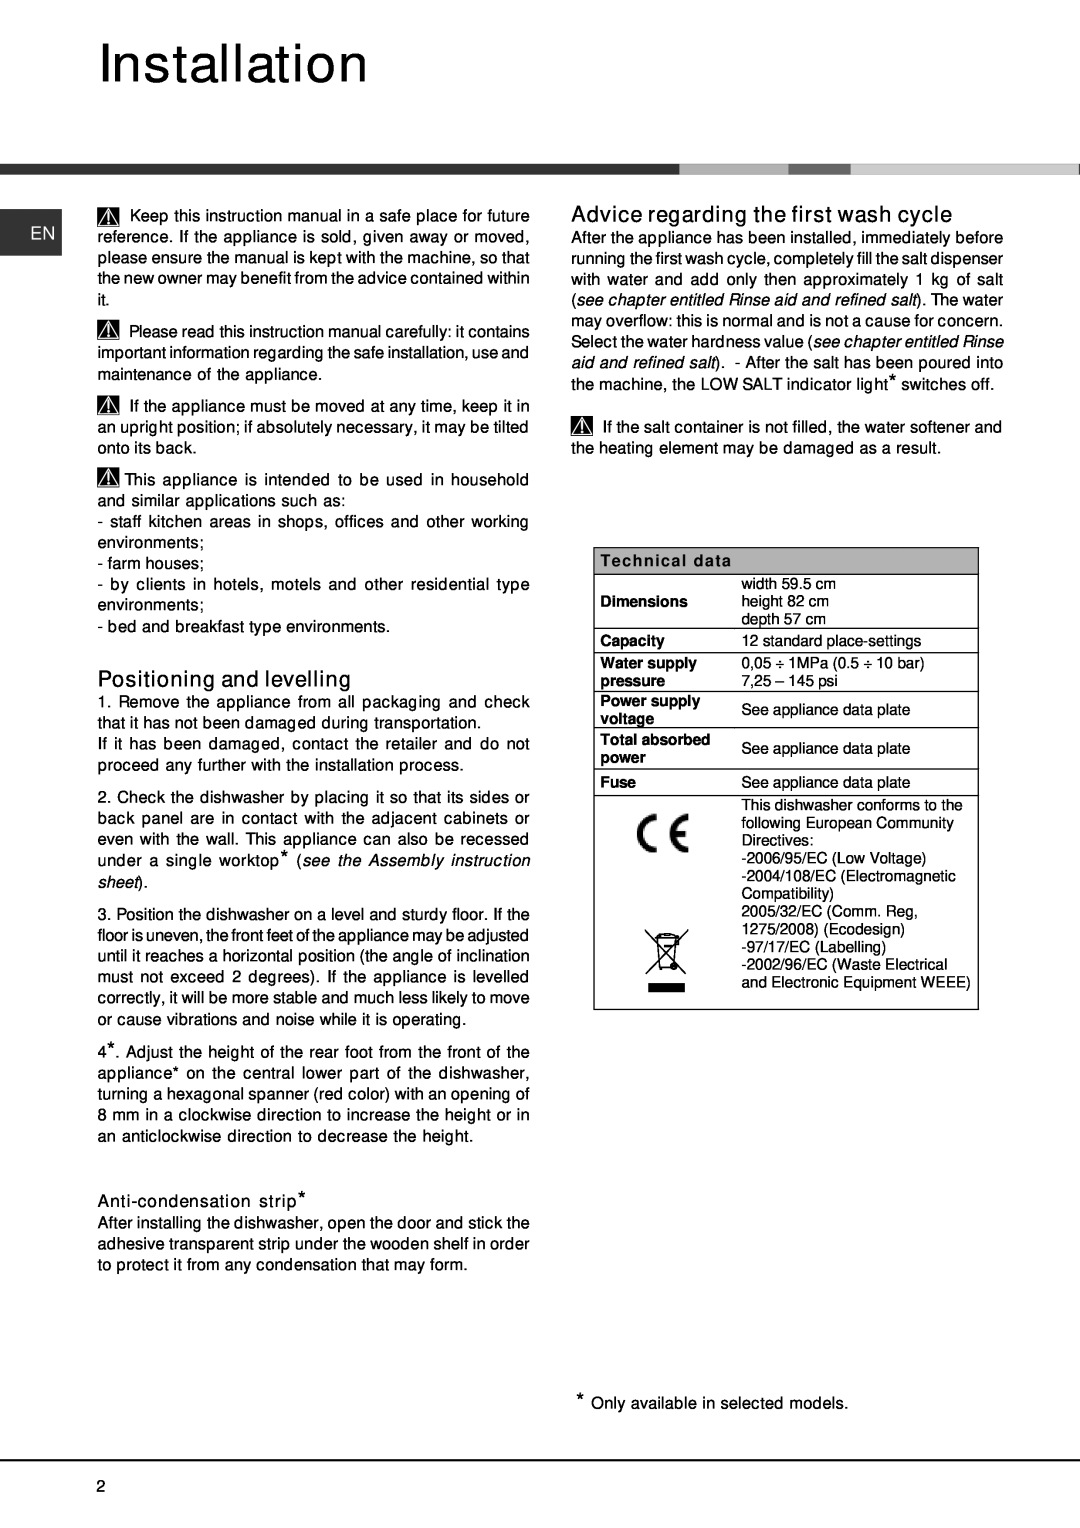 Hotpoint 228 manual Installation, Positioning and levelling, Advice regarding the first wash cycle, Anti-condensationstrip 